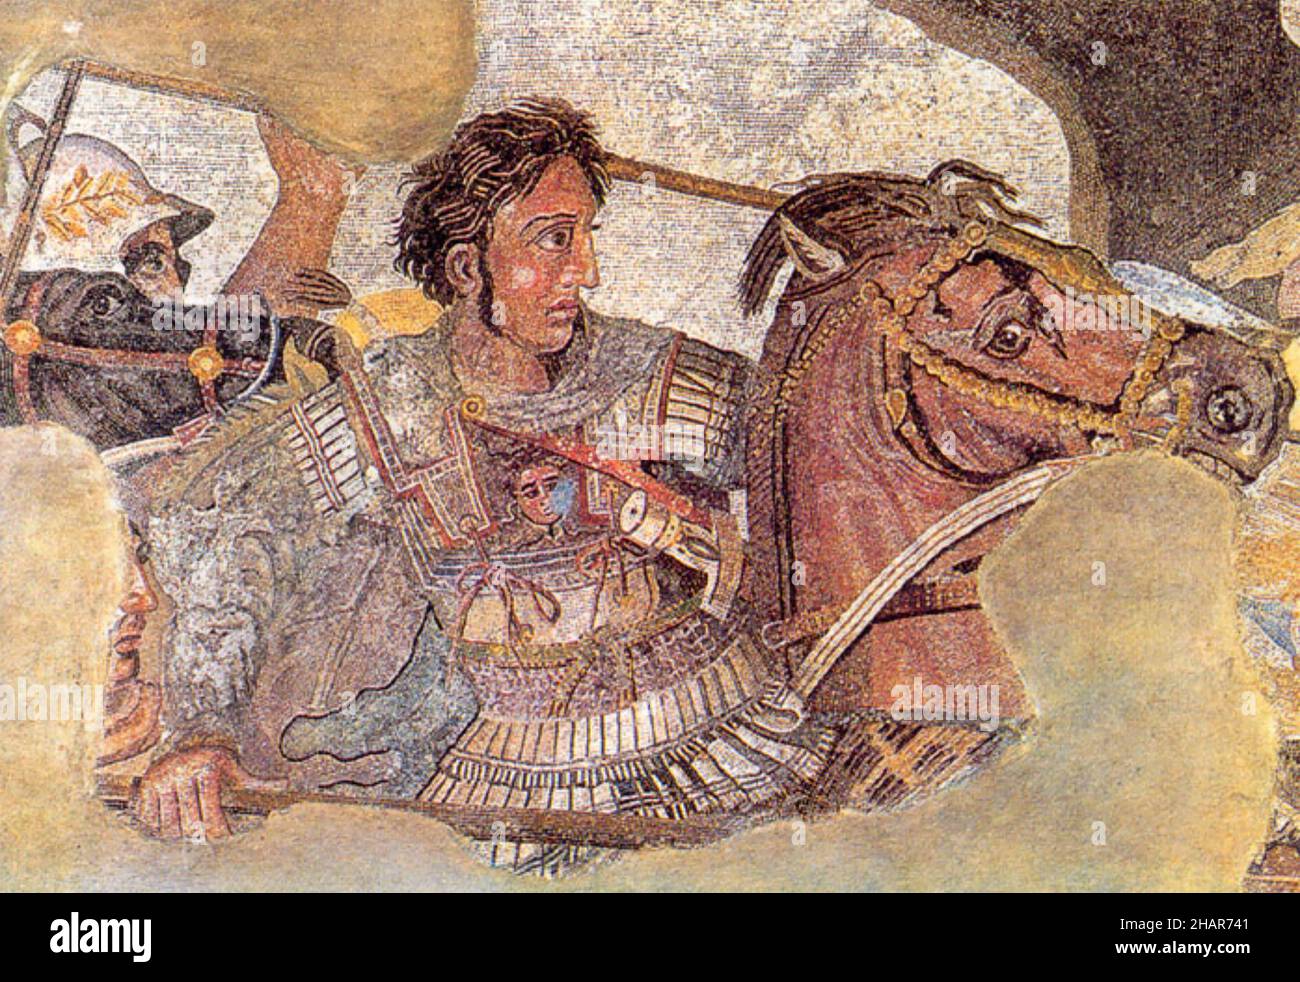 ALEXANDER THE GREAT Macedonian King (356 BC - 323 BC) in a 4th century BC mosaic from Pompeii Stock Photo